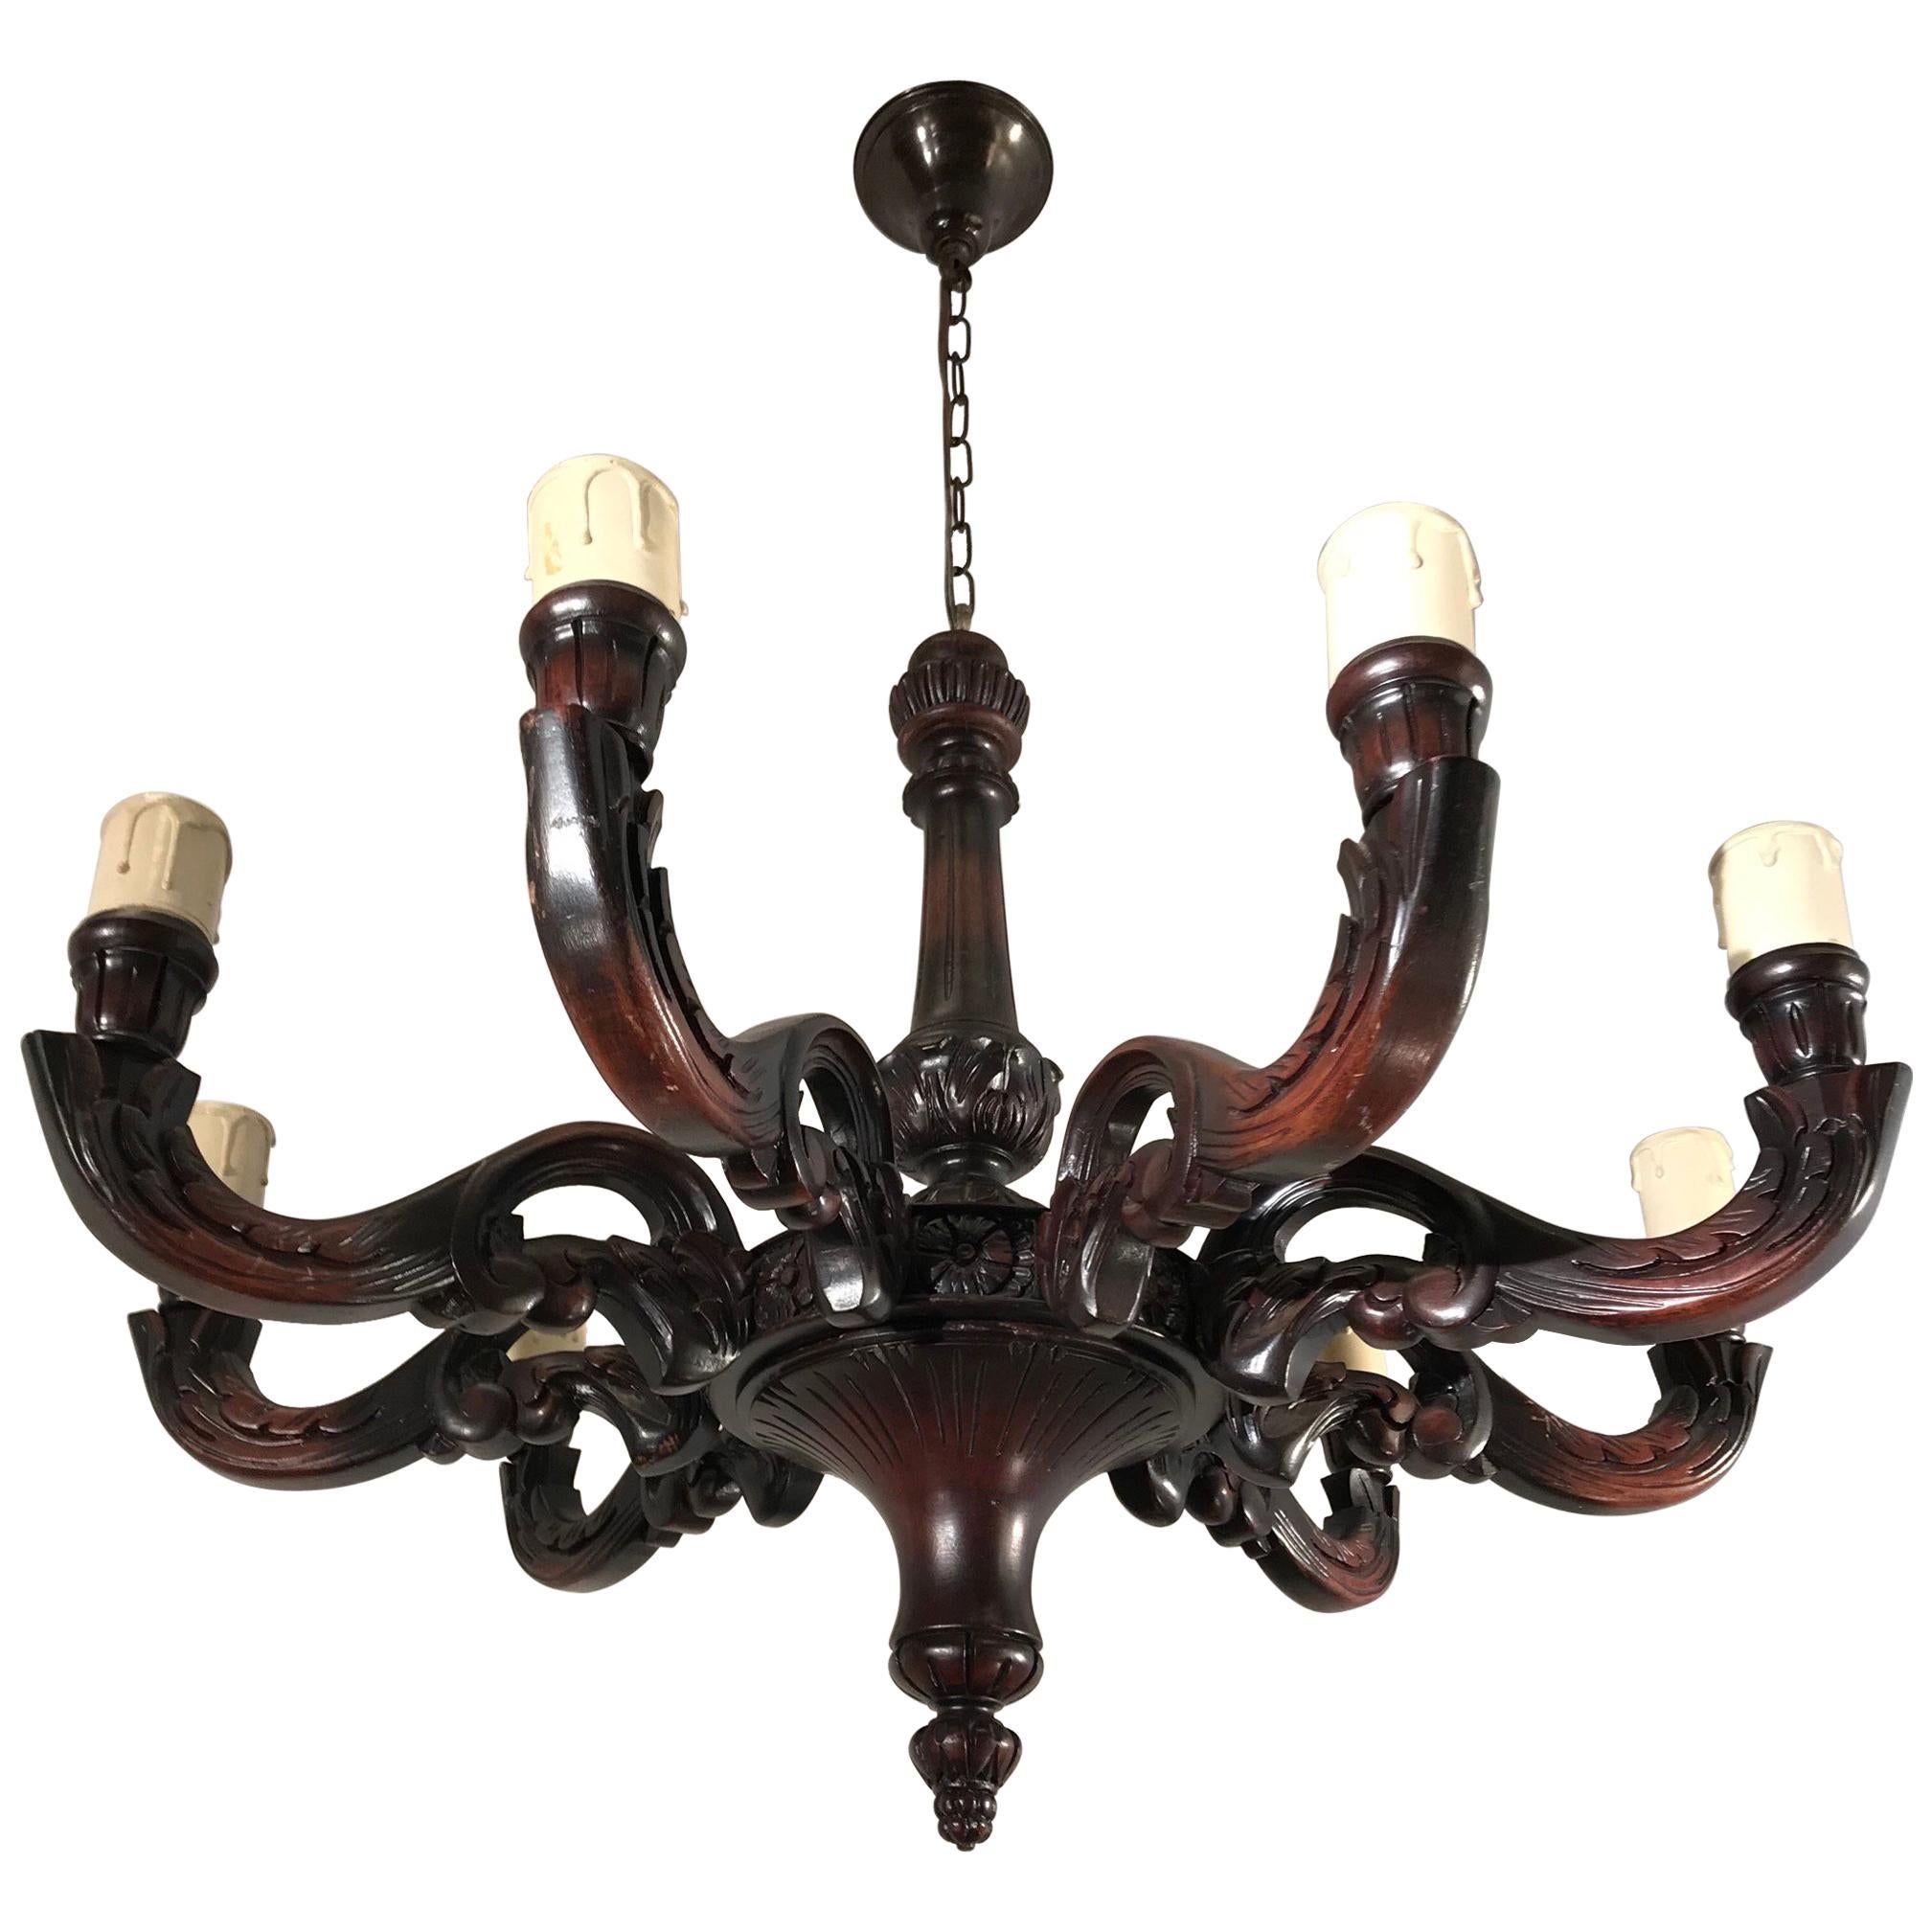 Large and All Handcrafted Wooden Nine-Arm Dining Room Chandelier, Great Patina